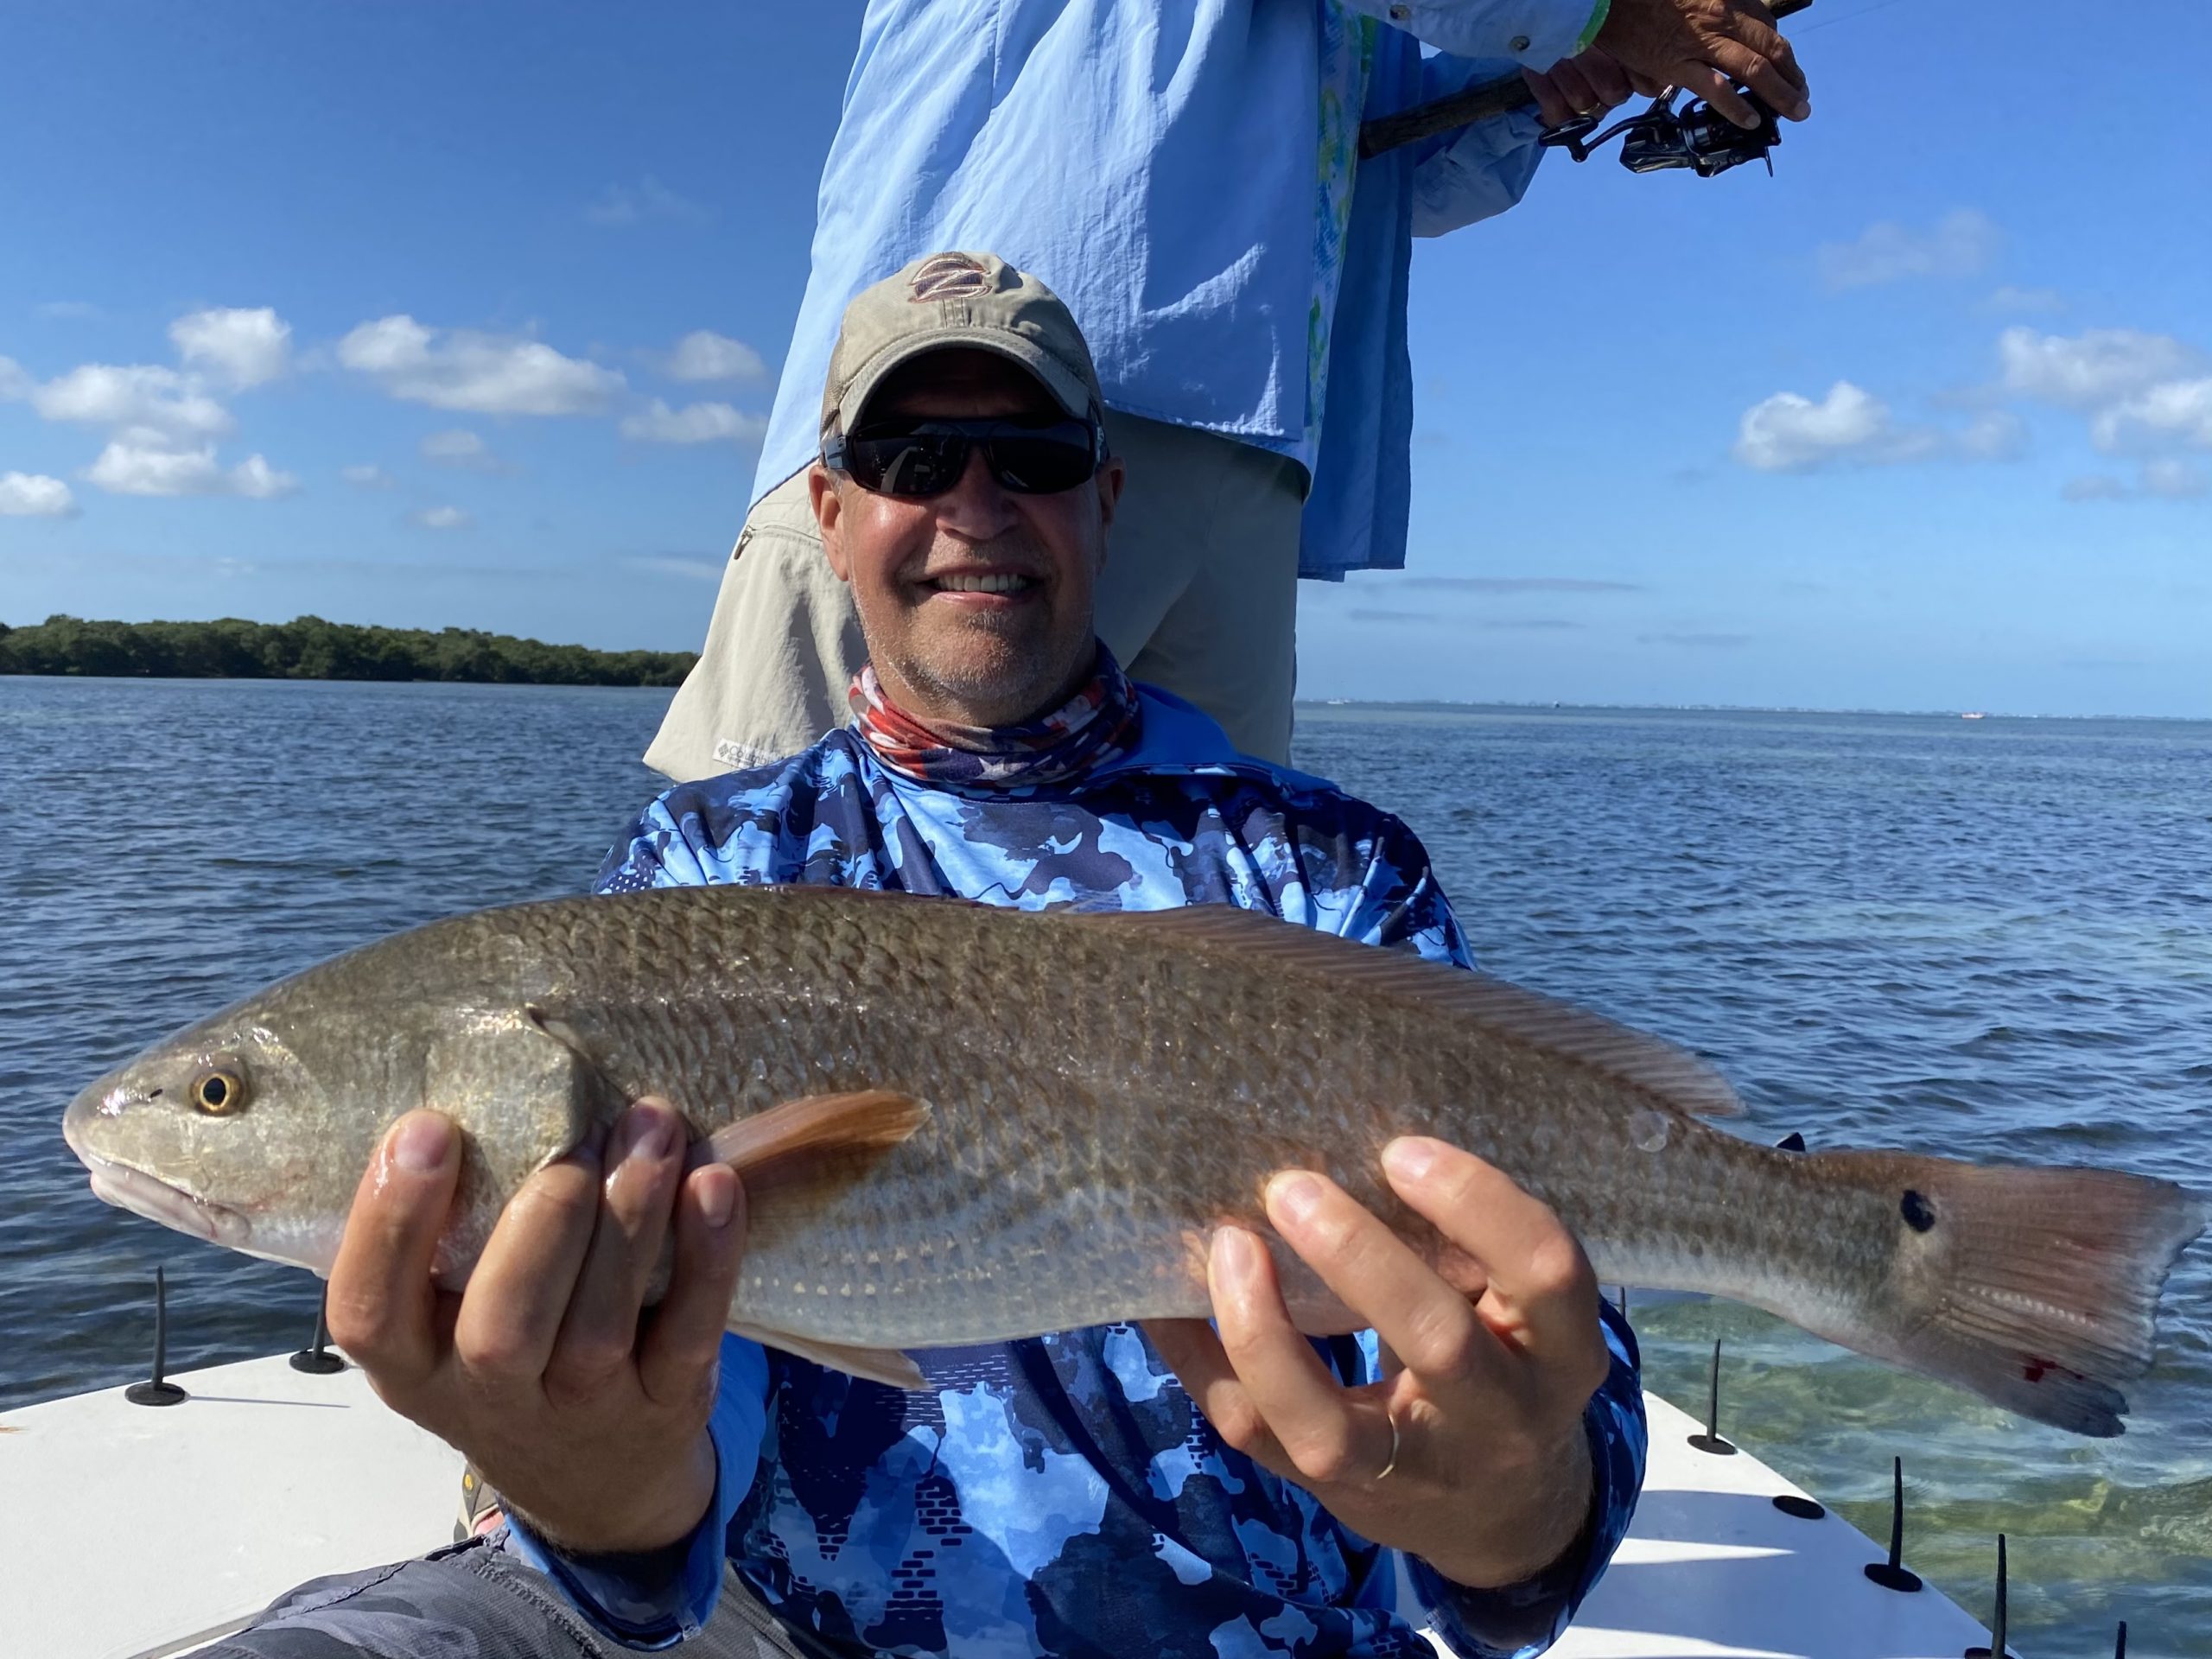 An angler holds a redfish he caught on a fishing charter in lower tampa bay